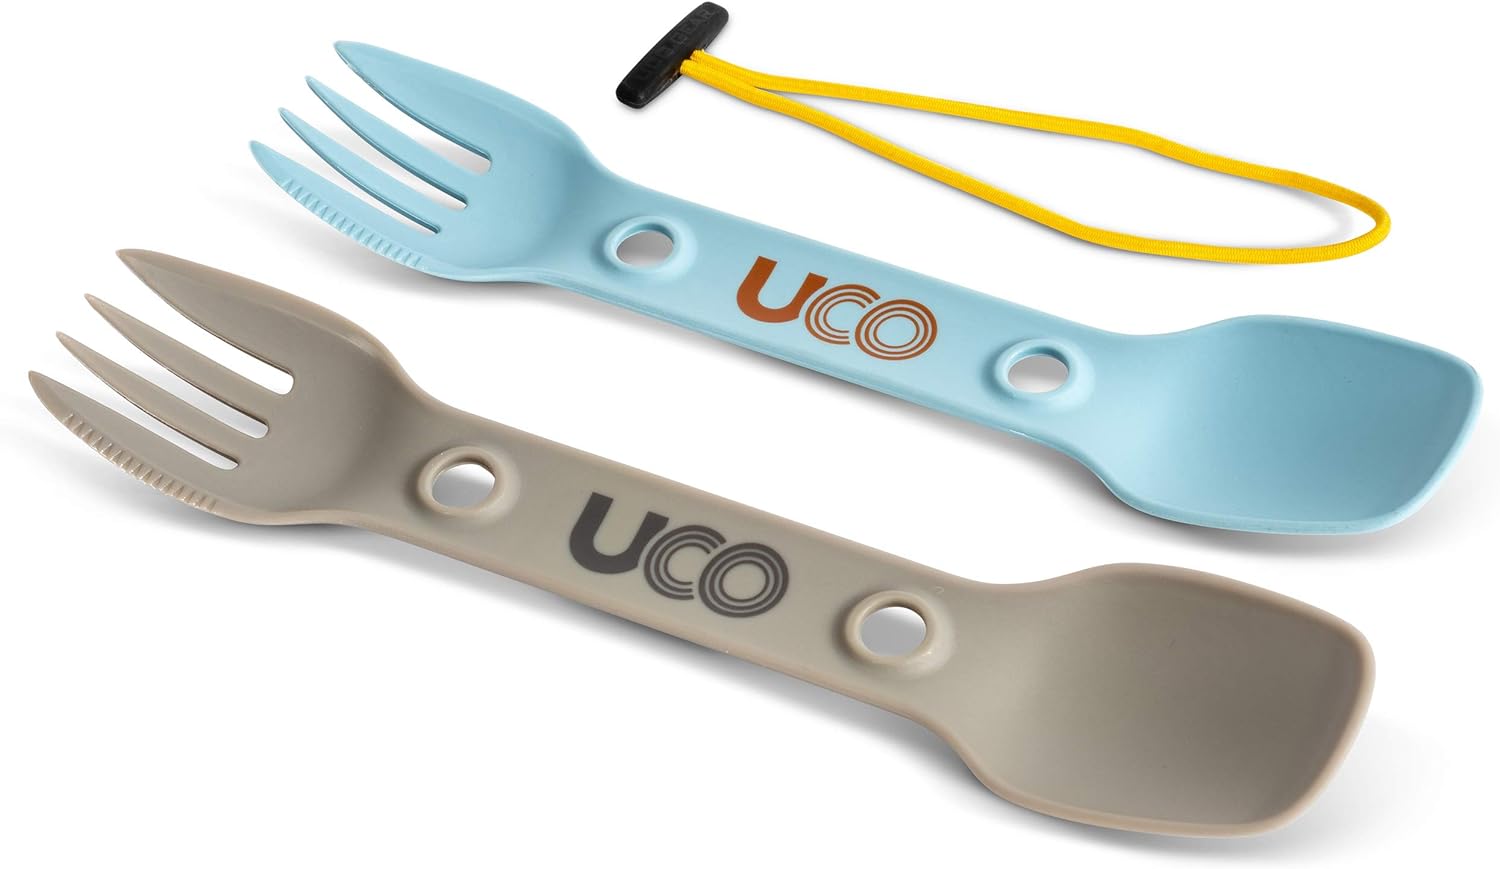 Two UCO Utility Sporks, a spoon and fork combo utensil, in stainless steel